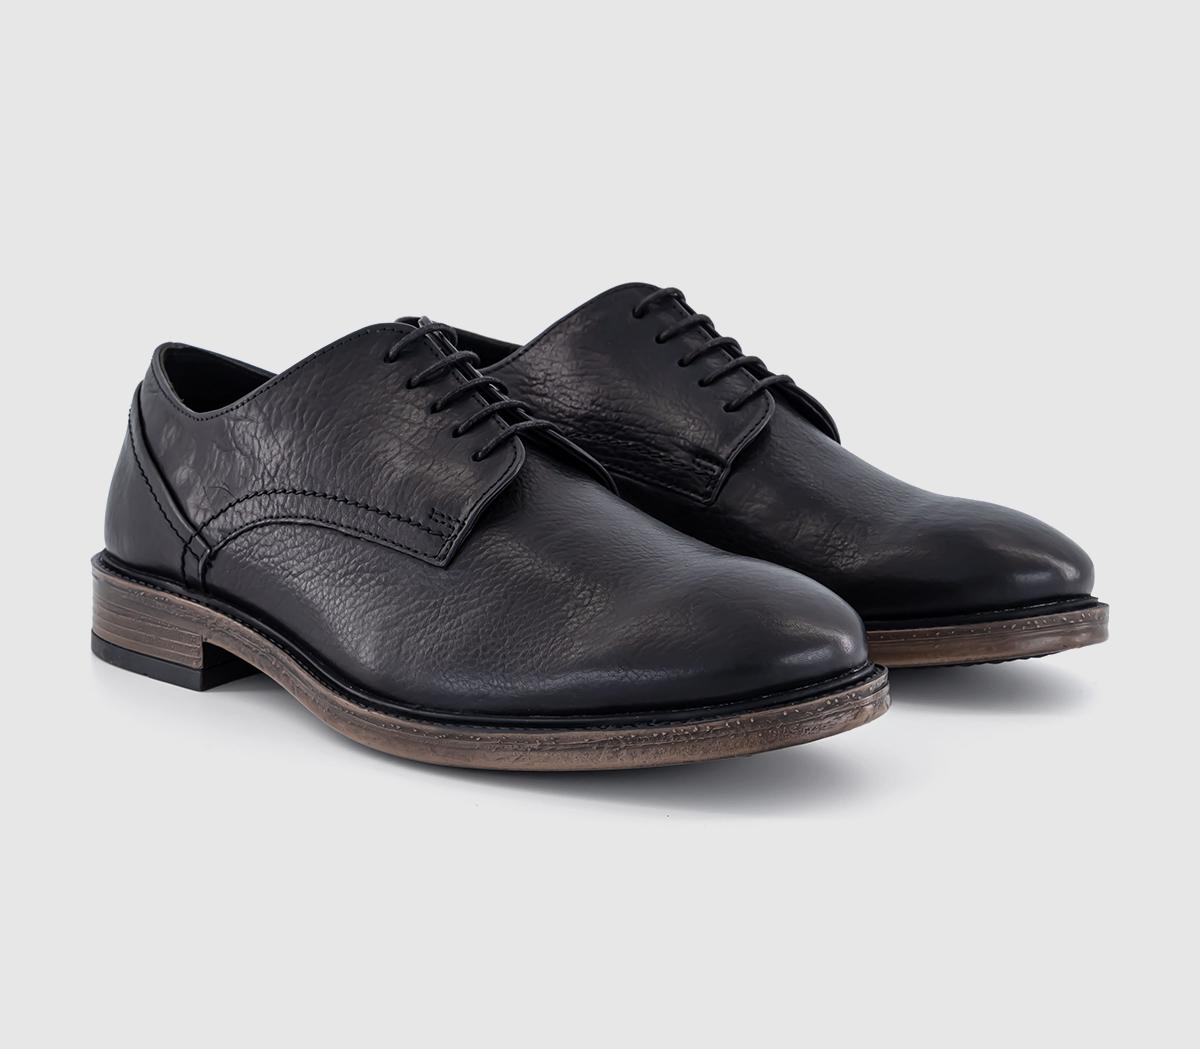 OFFICE Cadeleigh Casual Leather Derby Shoes Black, 10